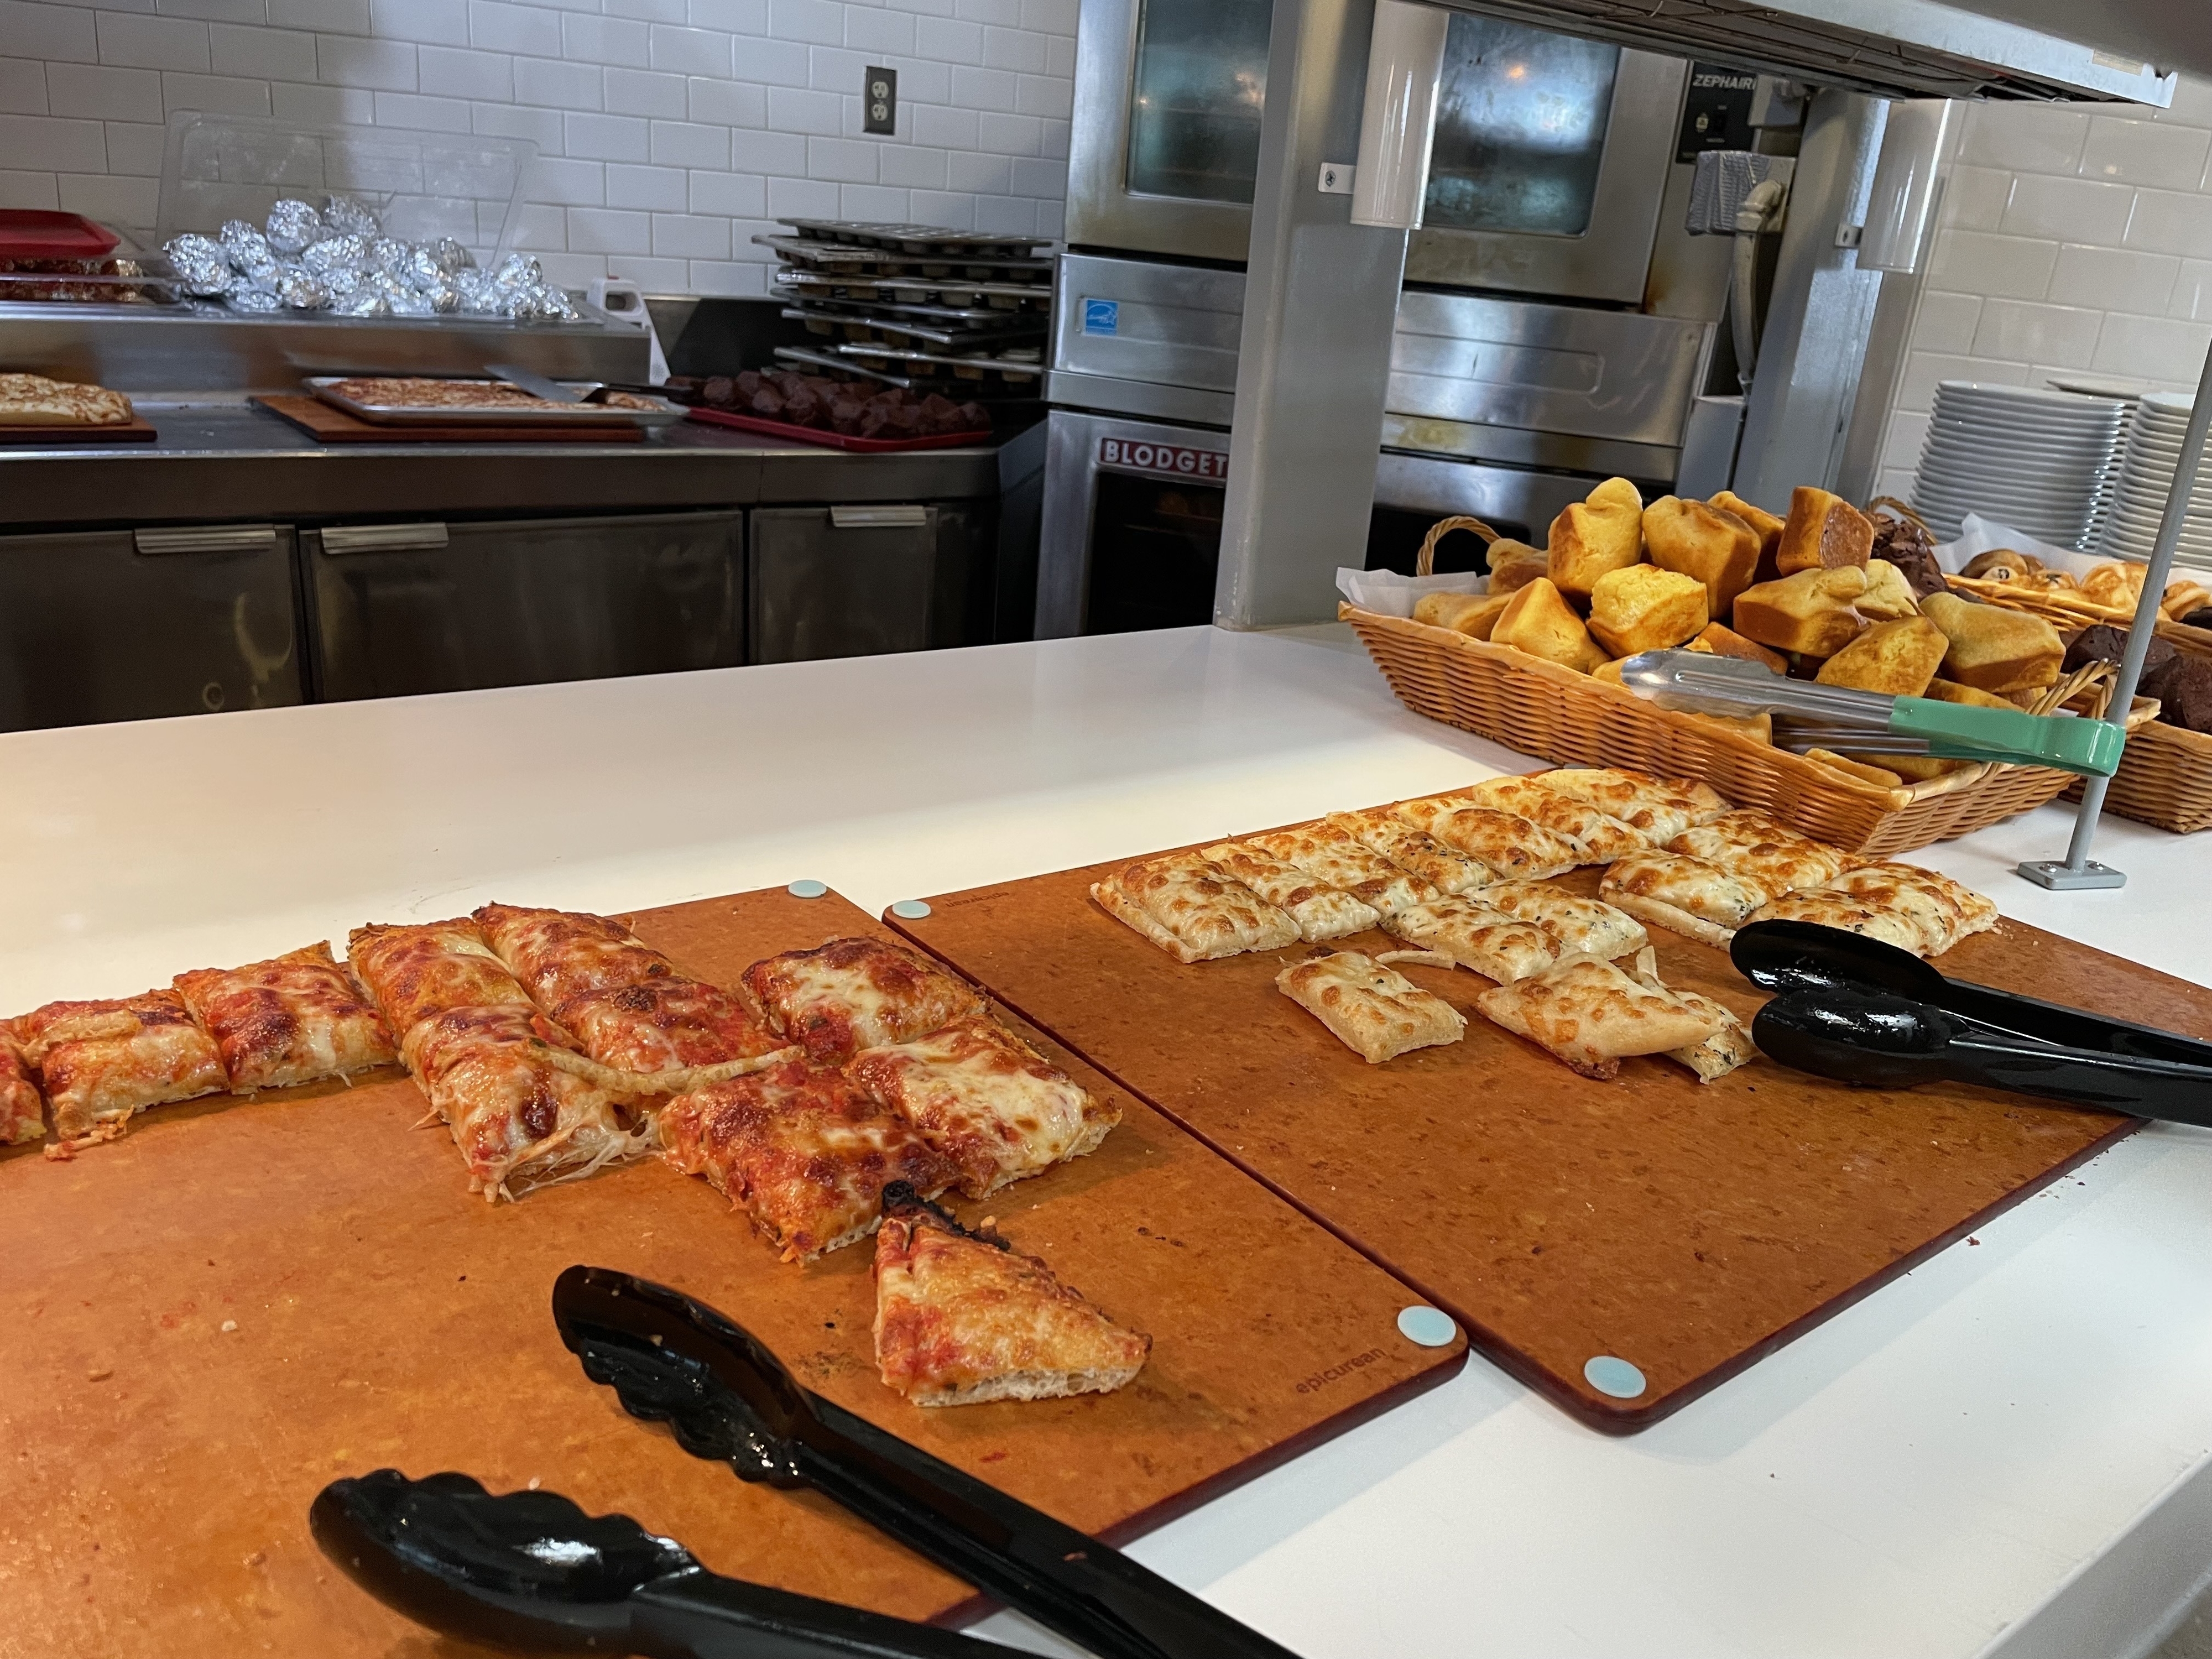 Assorted slices of pizza on a wooden board with tongs, next to a basket of garlic knots in a kitchen setting